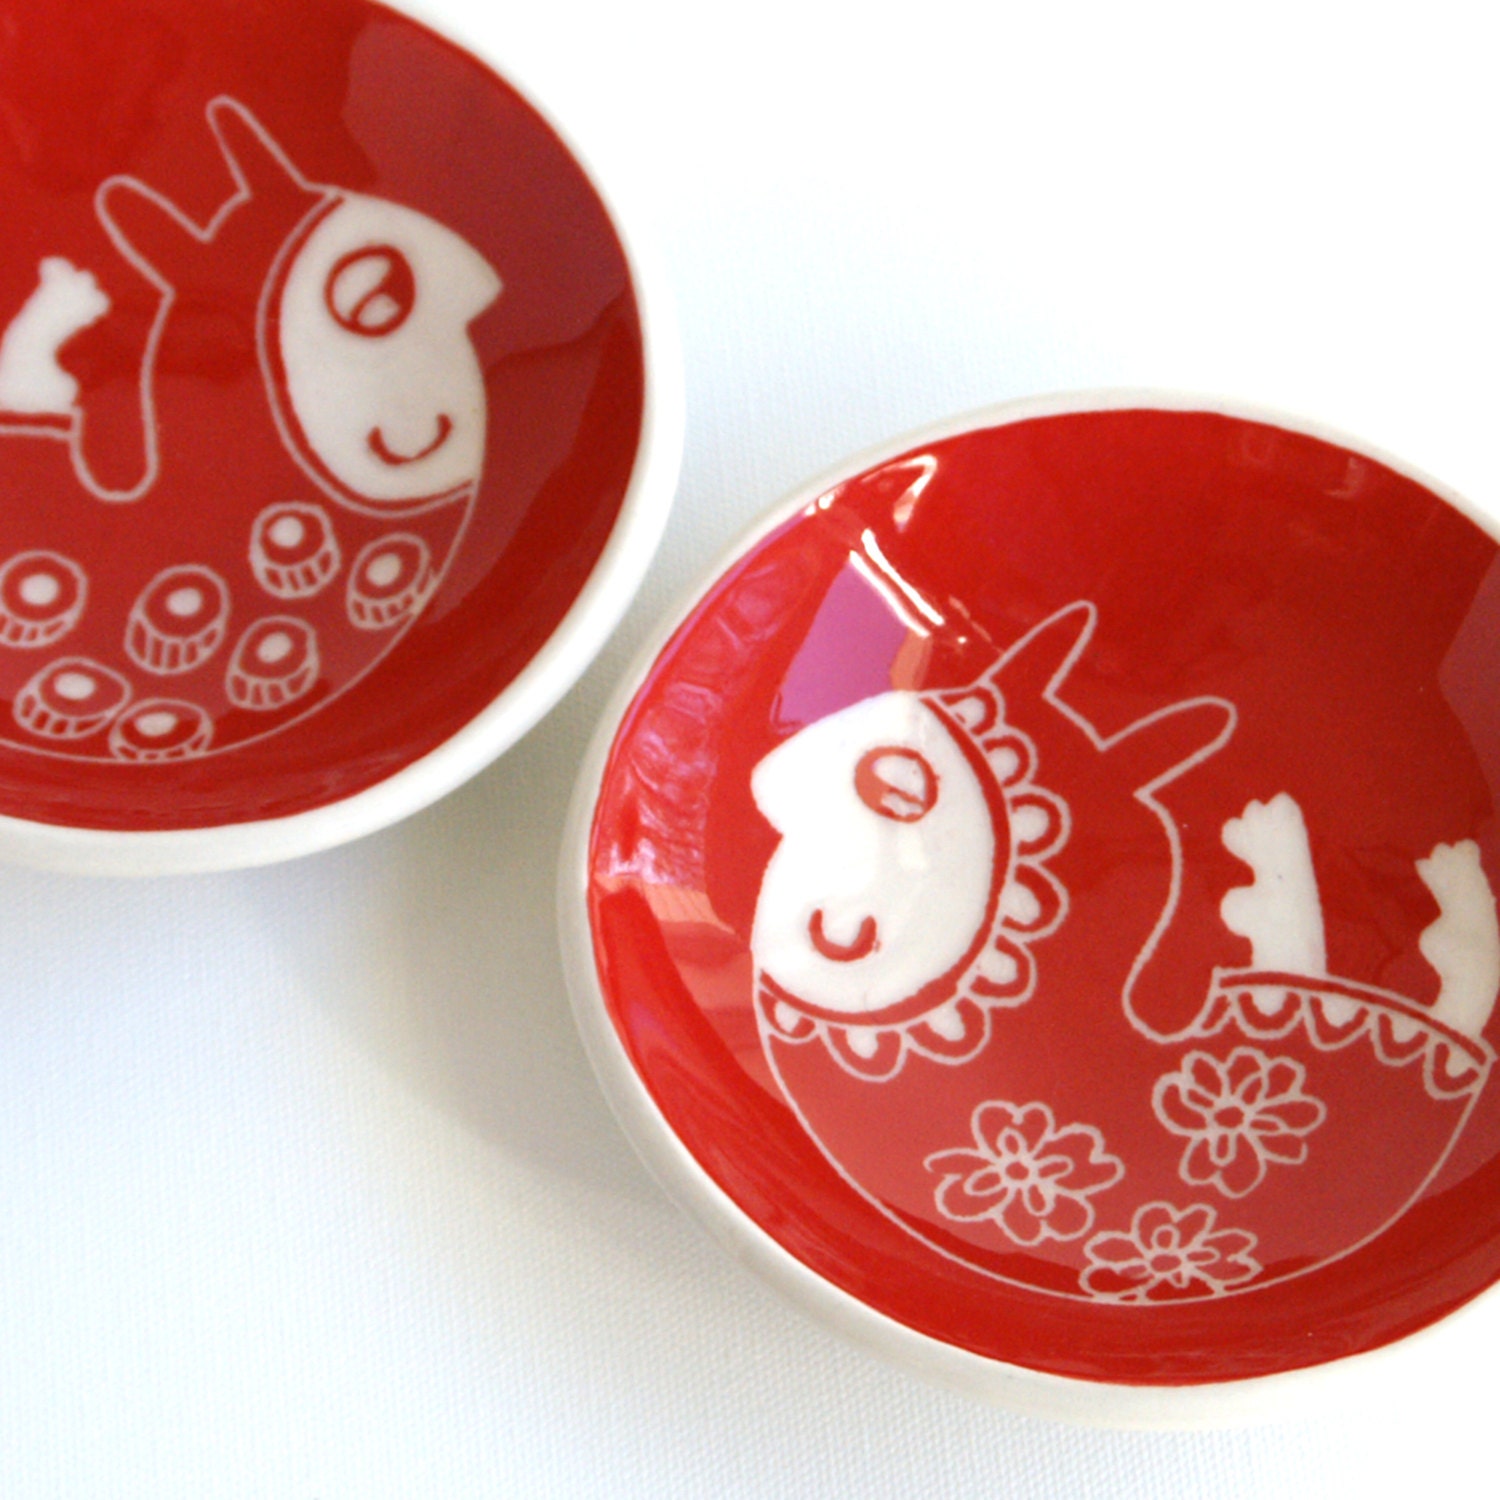 Mr and Mrs red bunny little dish set - Belinism